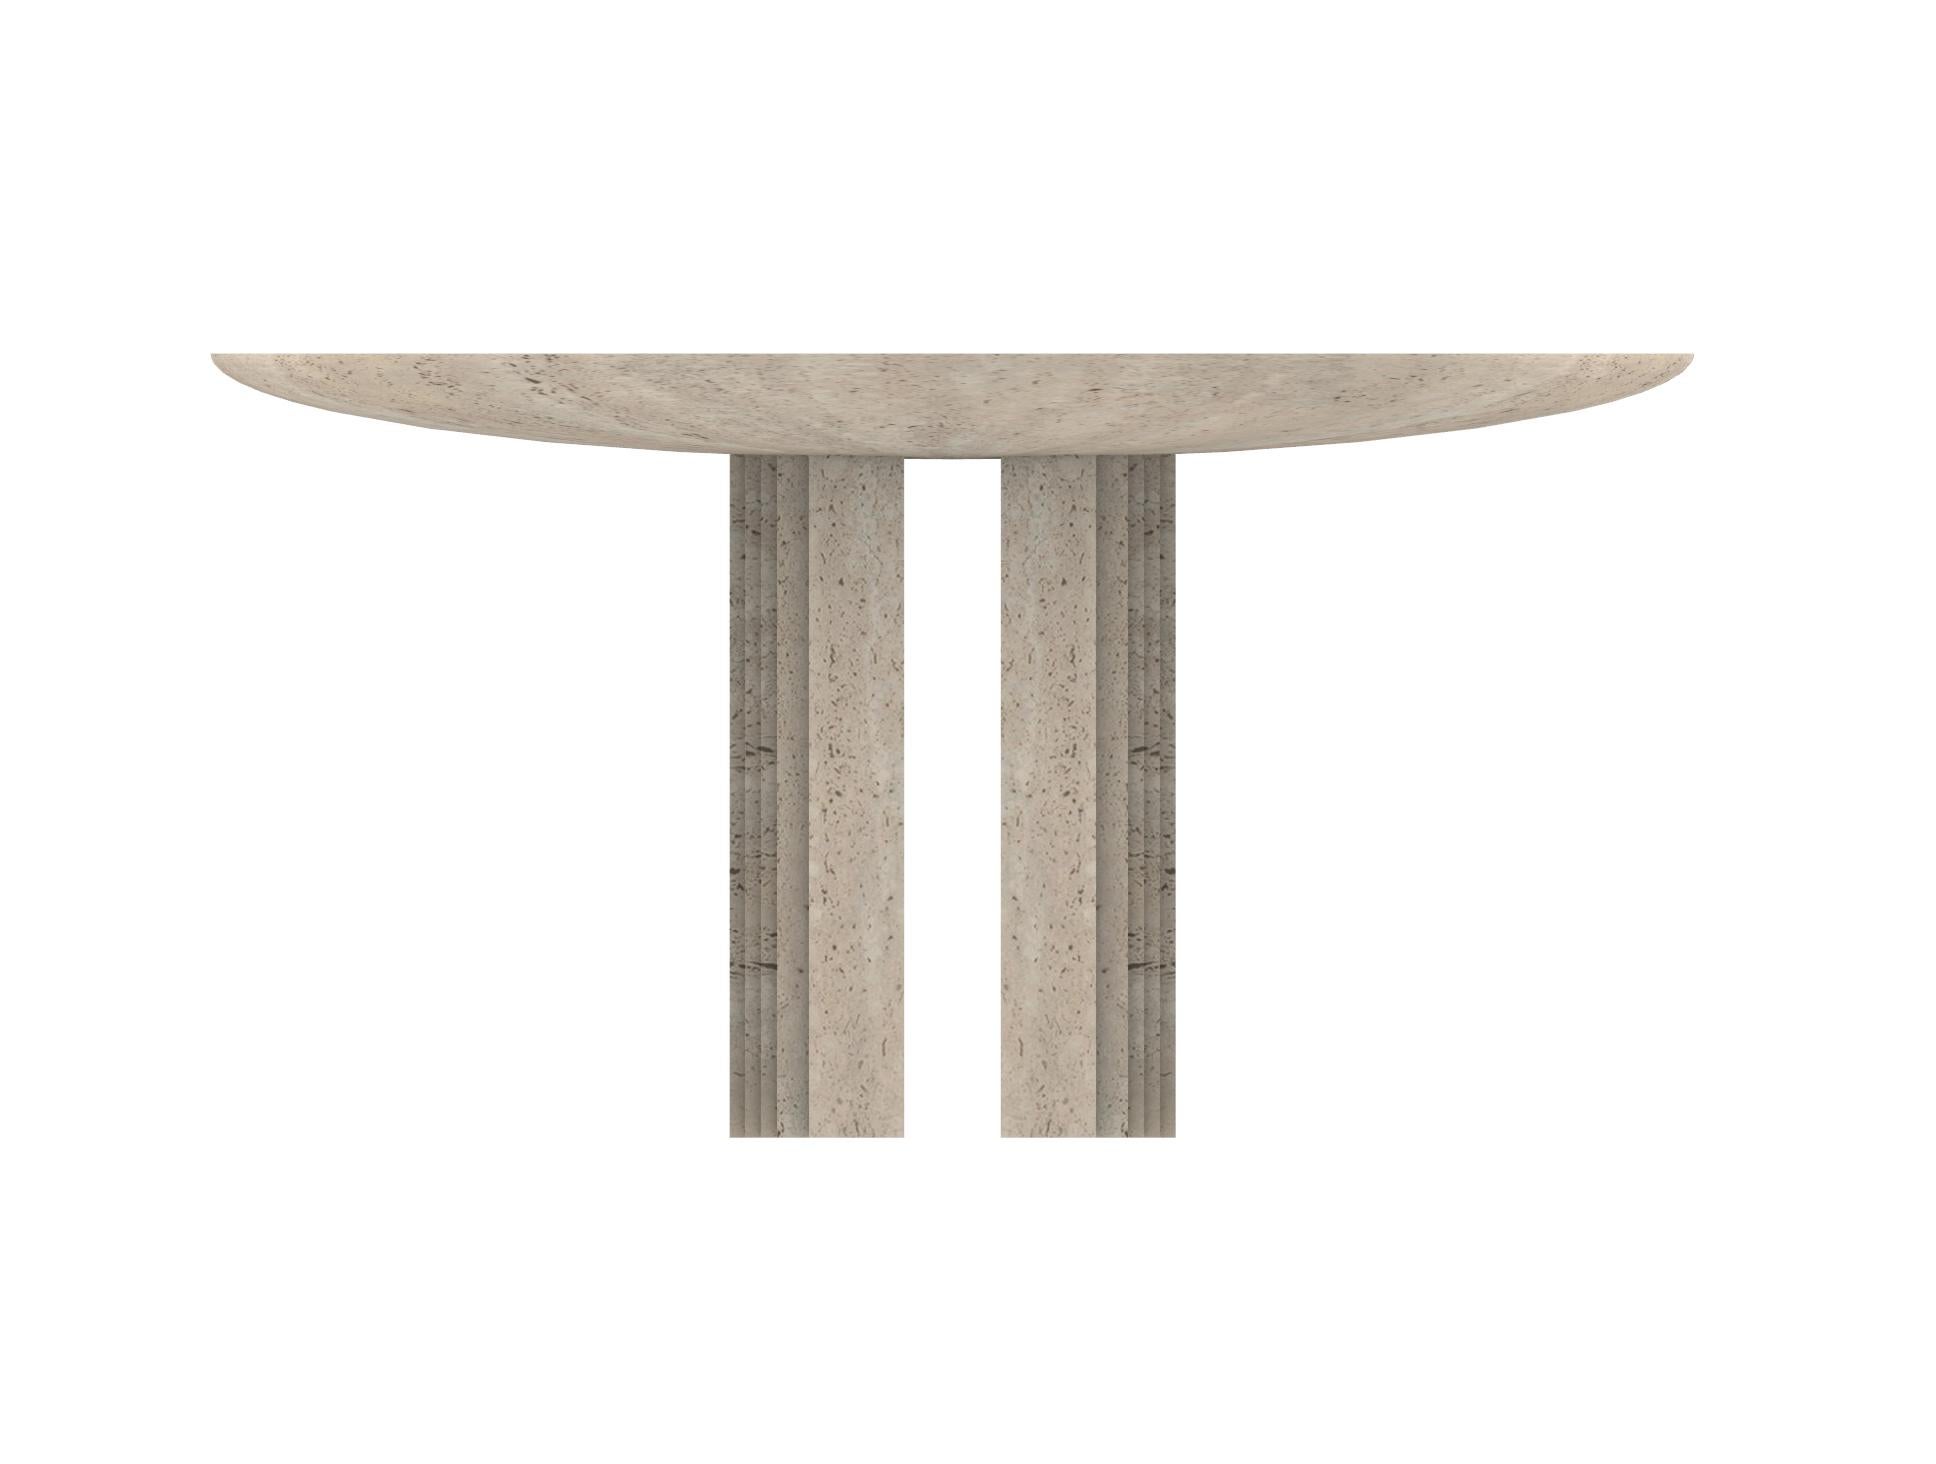 Bulgarian Dining table 0024c in Travertine by artist Desia Ava For Sale